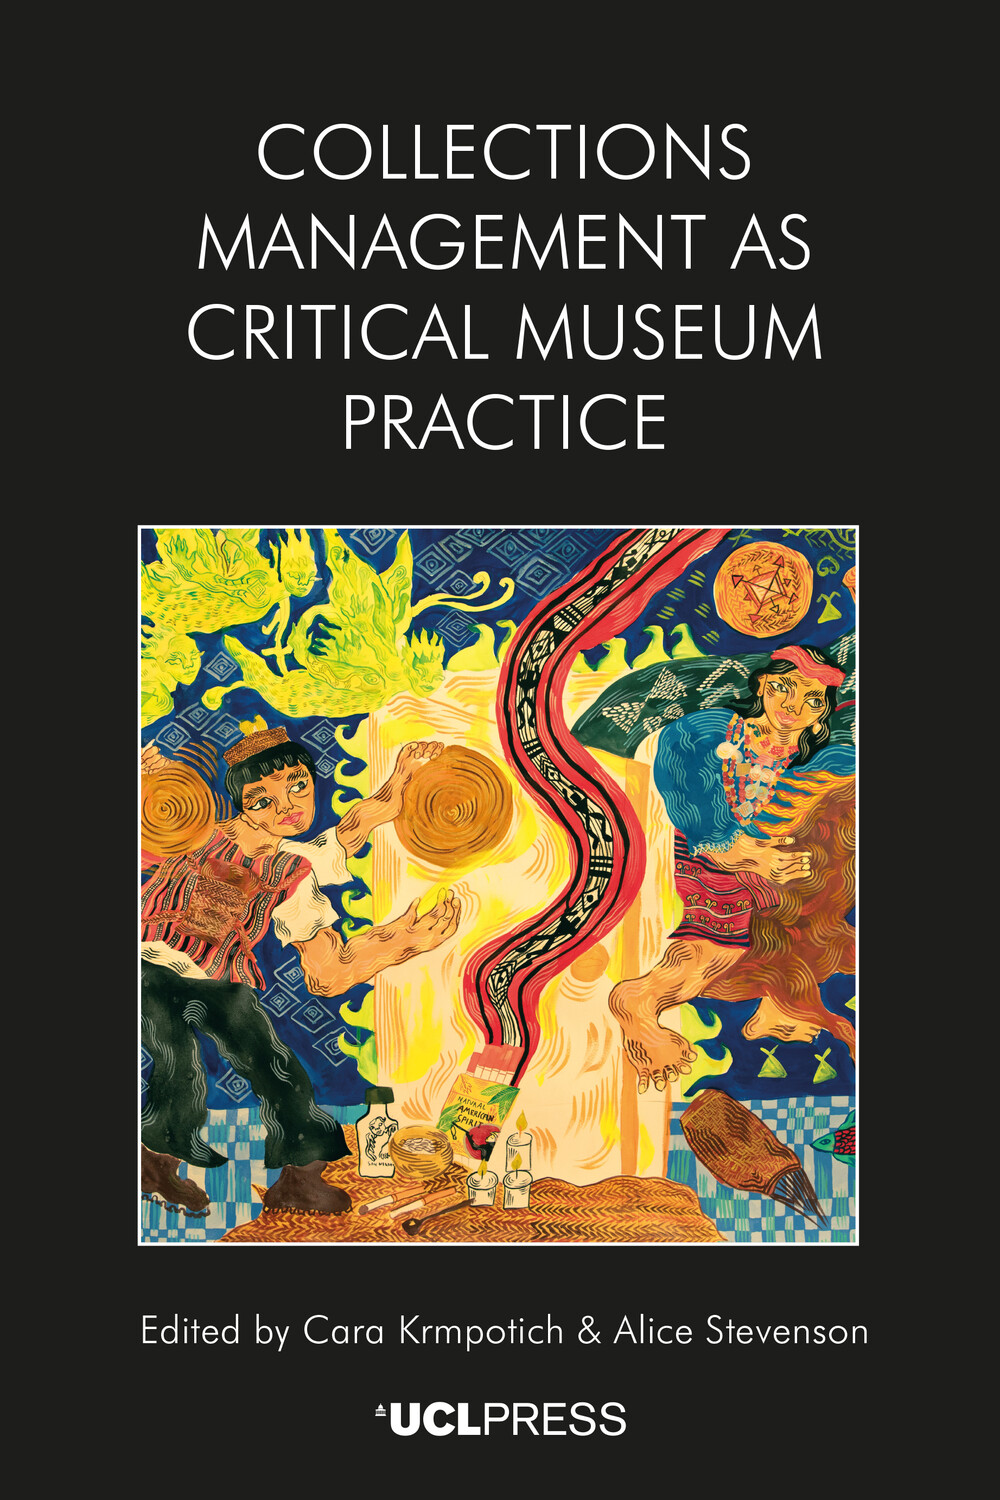 Collections Management as Critical Museum Practice Edited by Cara Krmpotich and Alice Stevenson